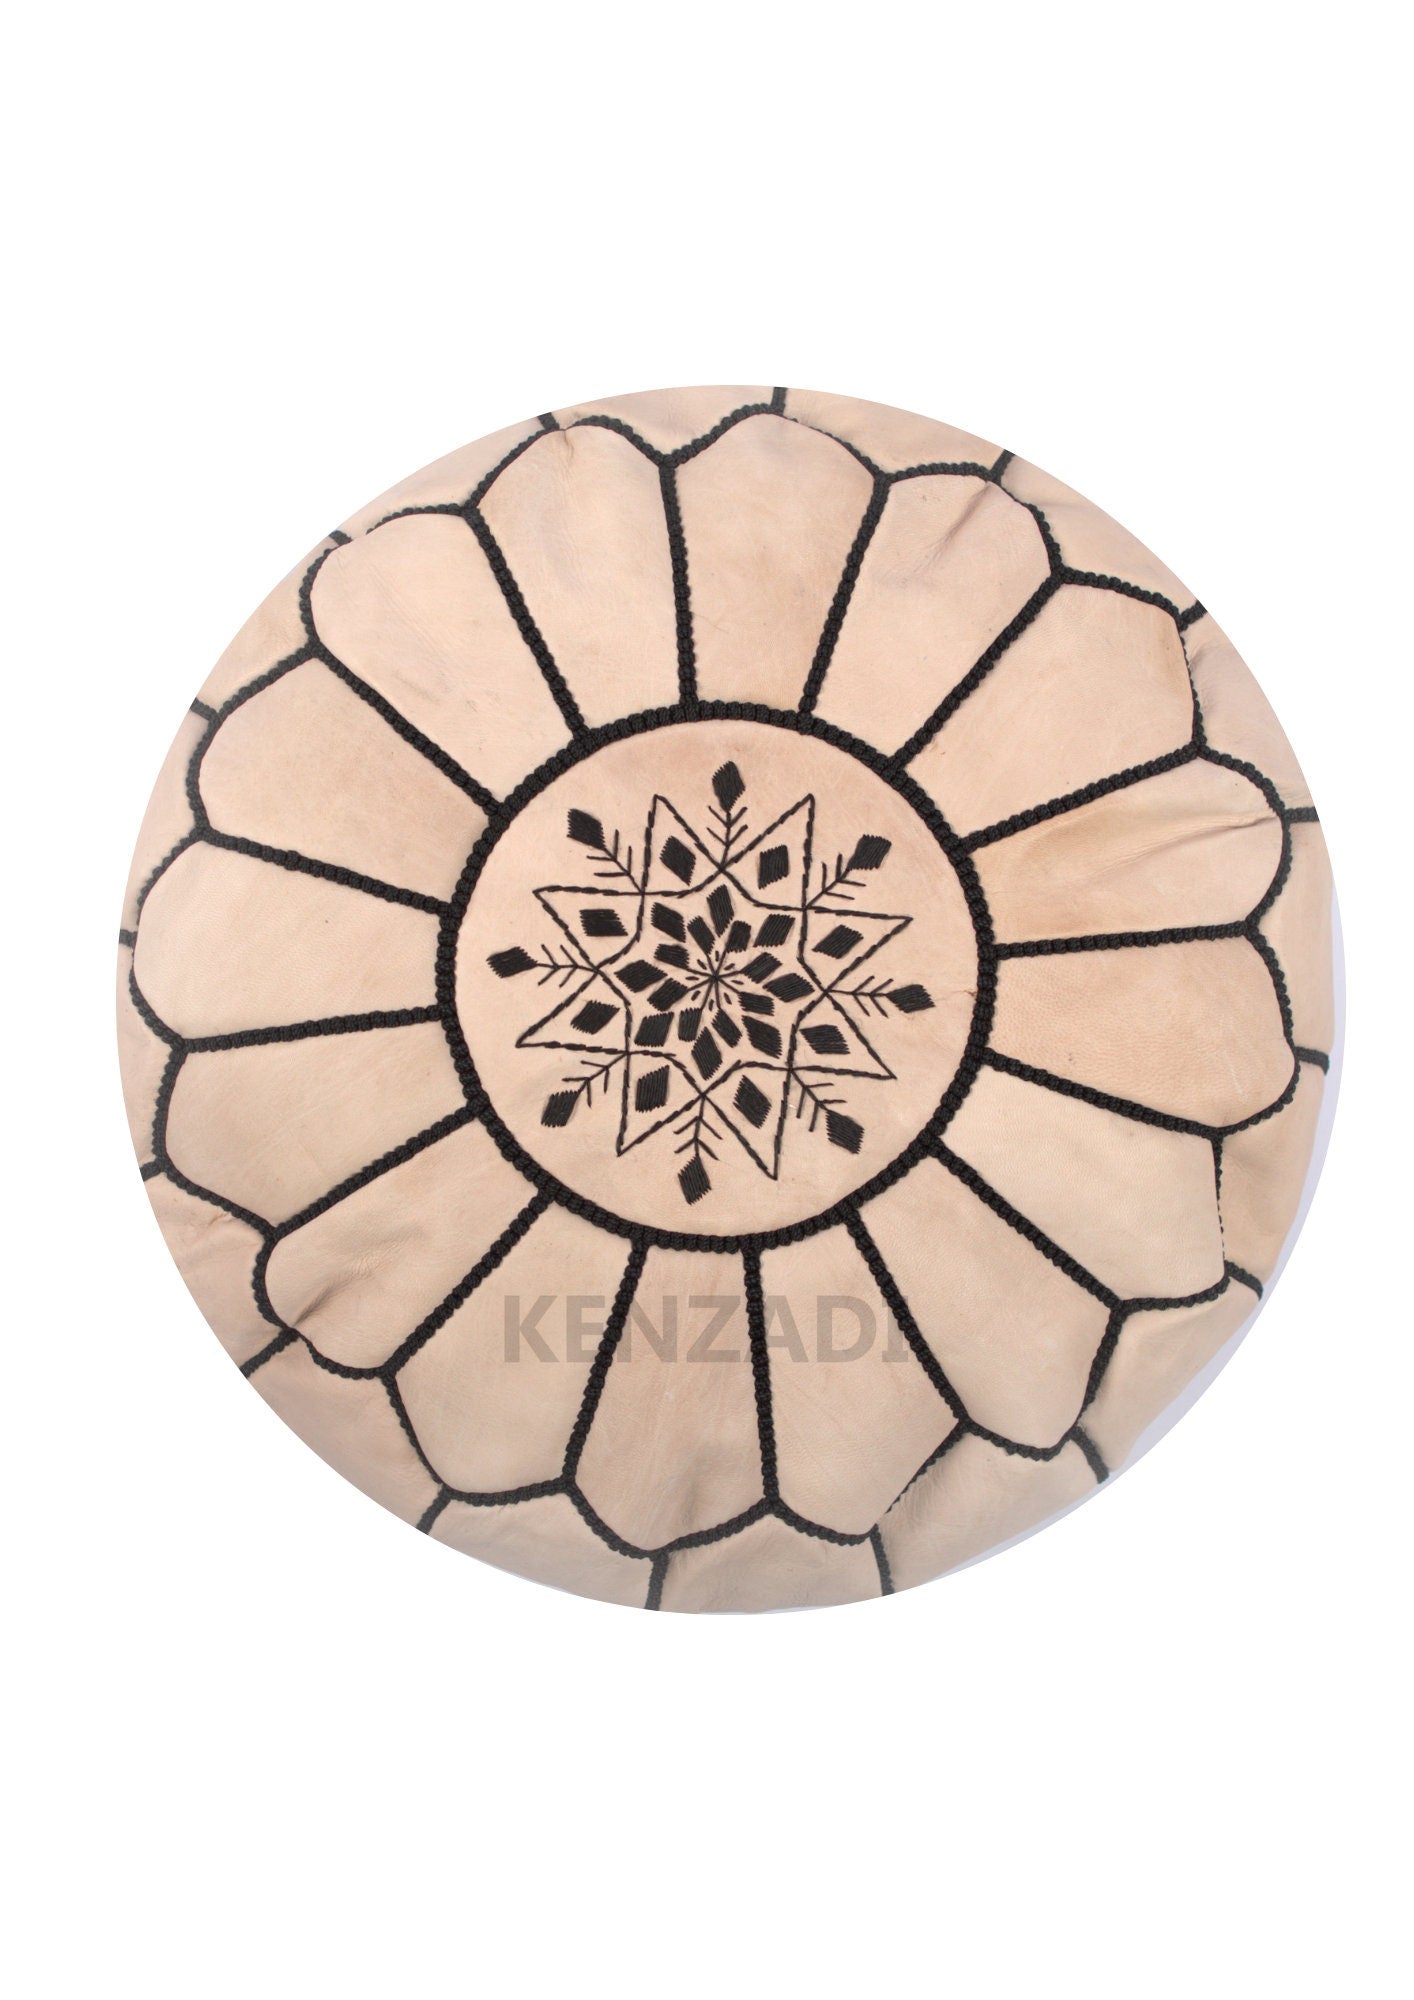 Handmade Moroccan pouf in sewn TAN leather with Beige and Black embroidery. Perfect for adding a bohemian touch to your decor.